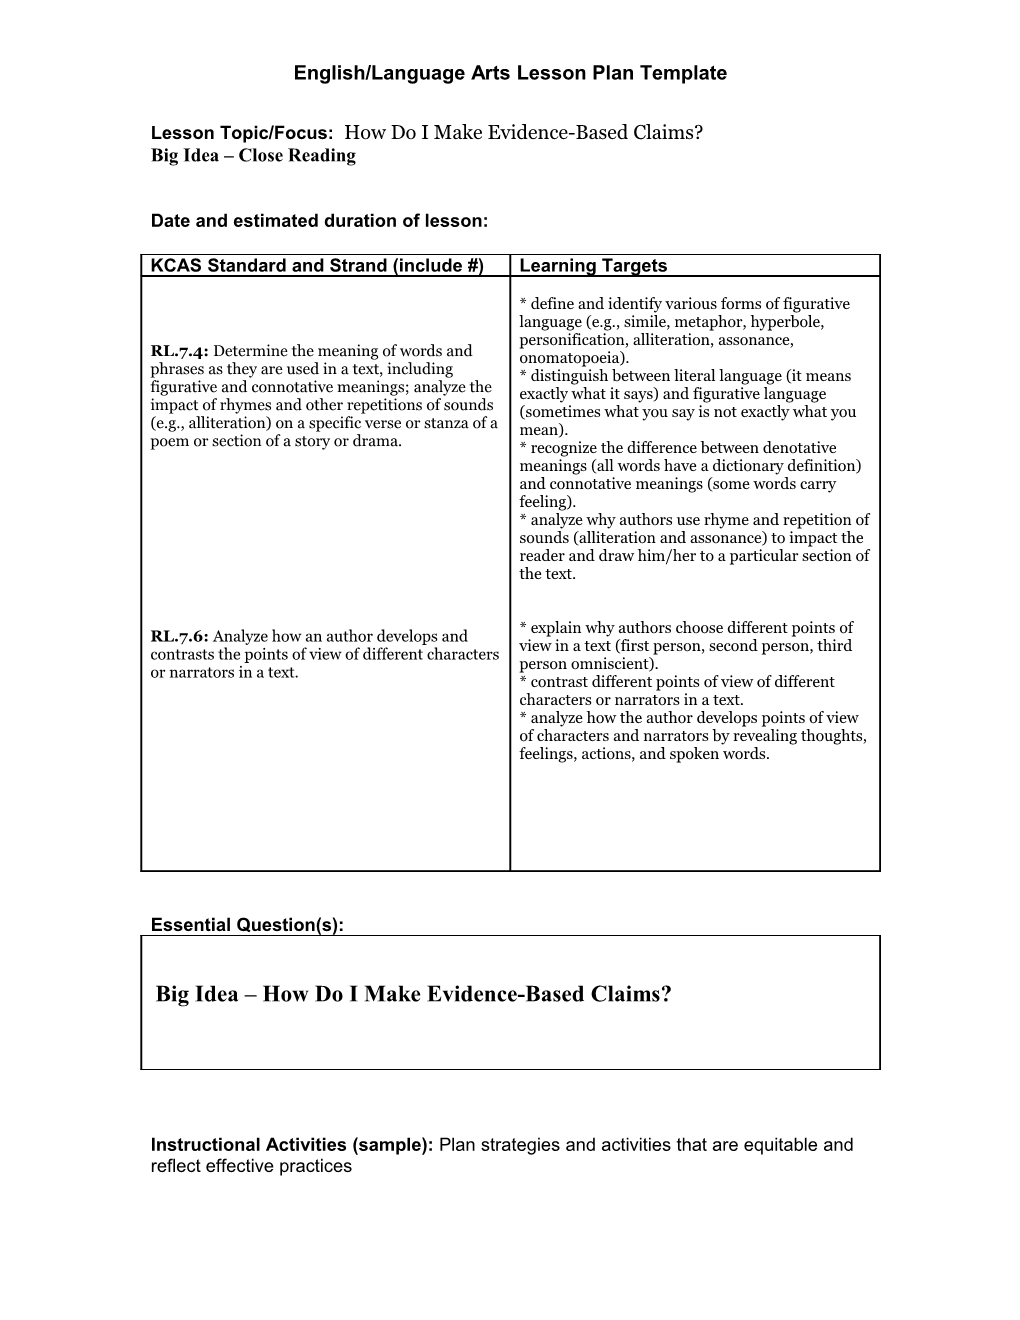 Part II: Lesson Plan Template